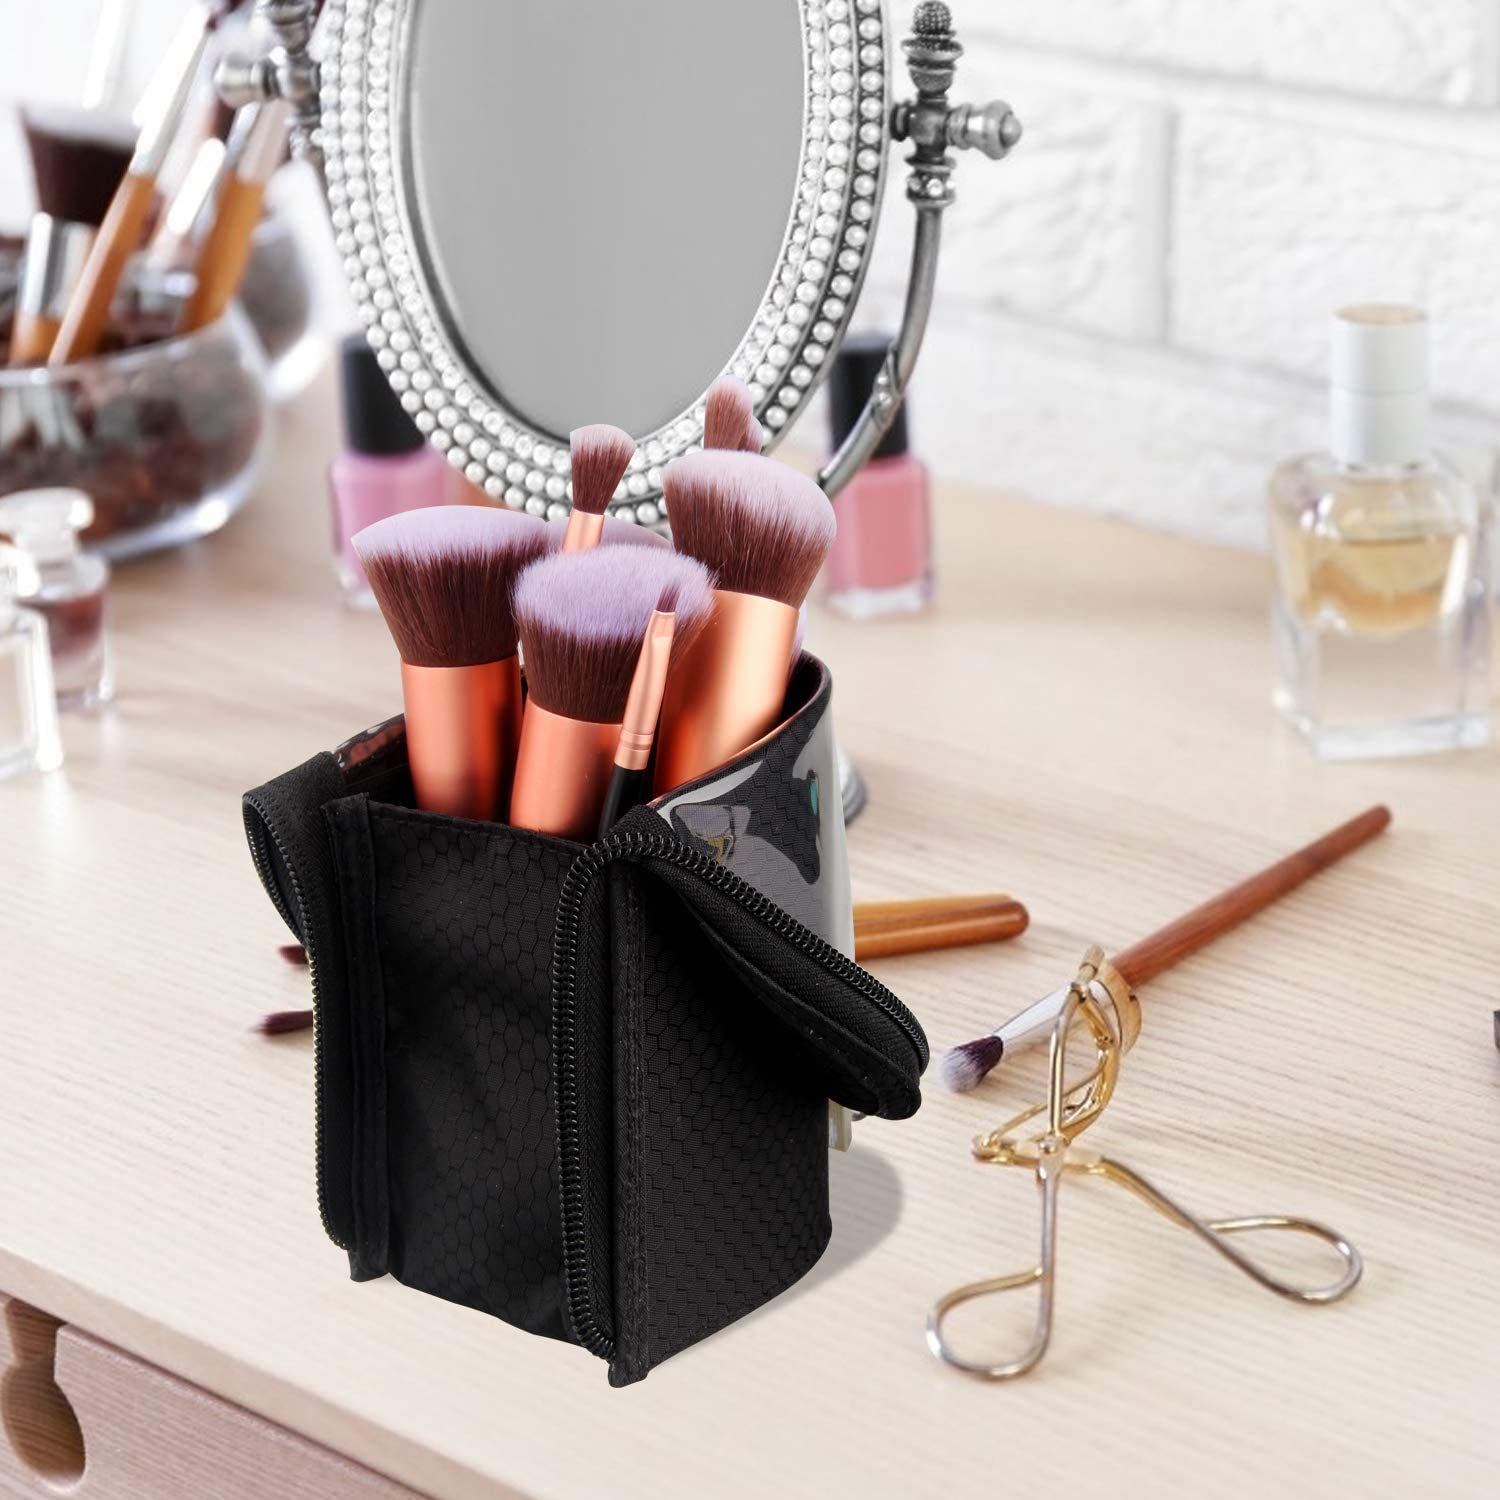 Makeup Brush Case Makeup Brush Holder Travel Professional Cosmetic Bag Artist Storage Bag Stand-up Foldable Makeup Cup for brushes, Lip Glosses, Eyeliners, Eyebrow Pencil (Black, Small)